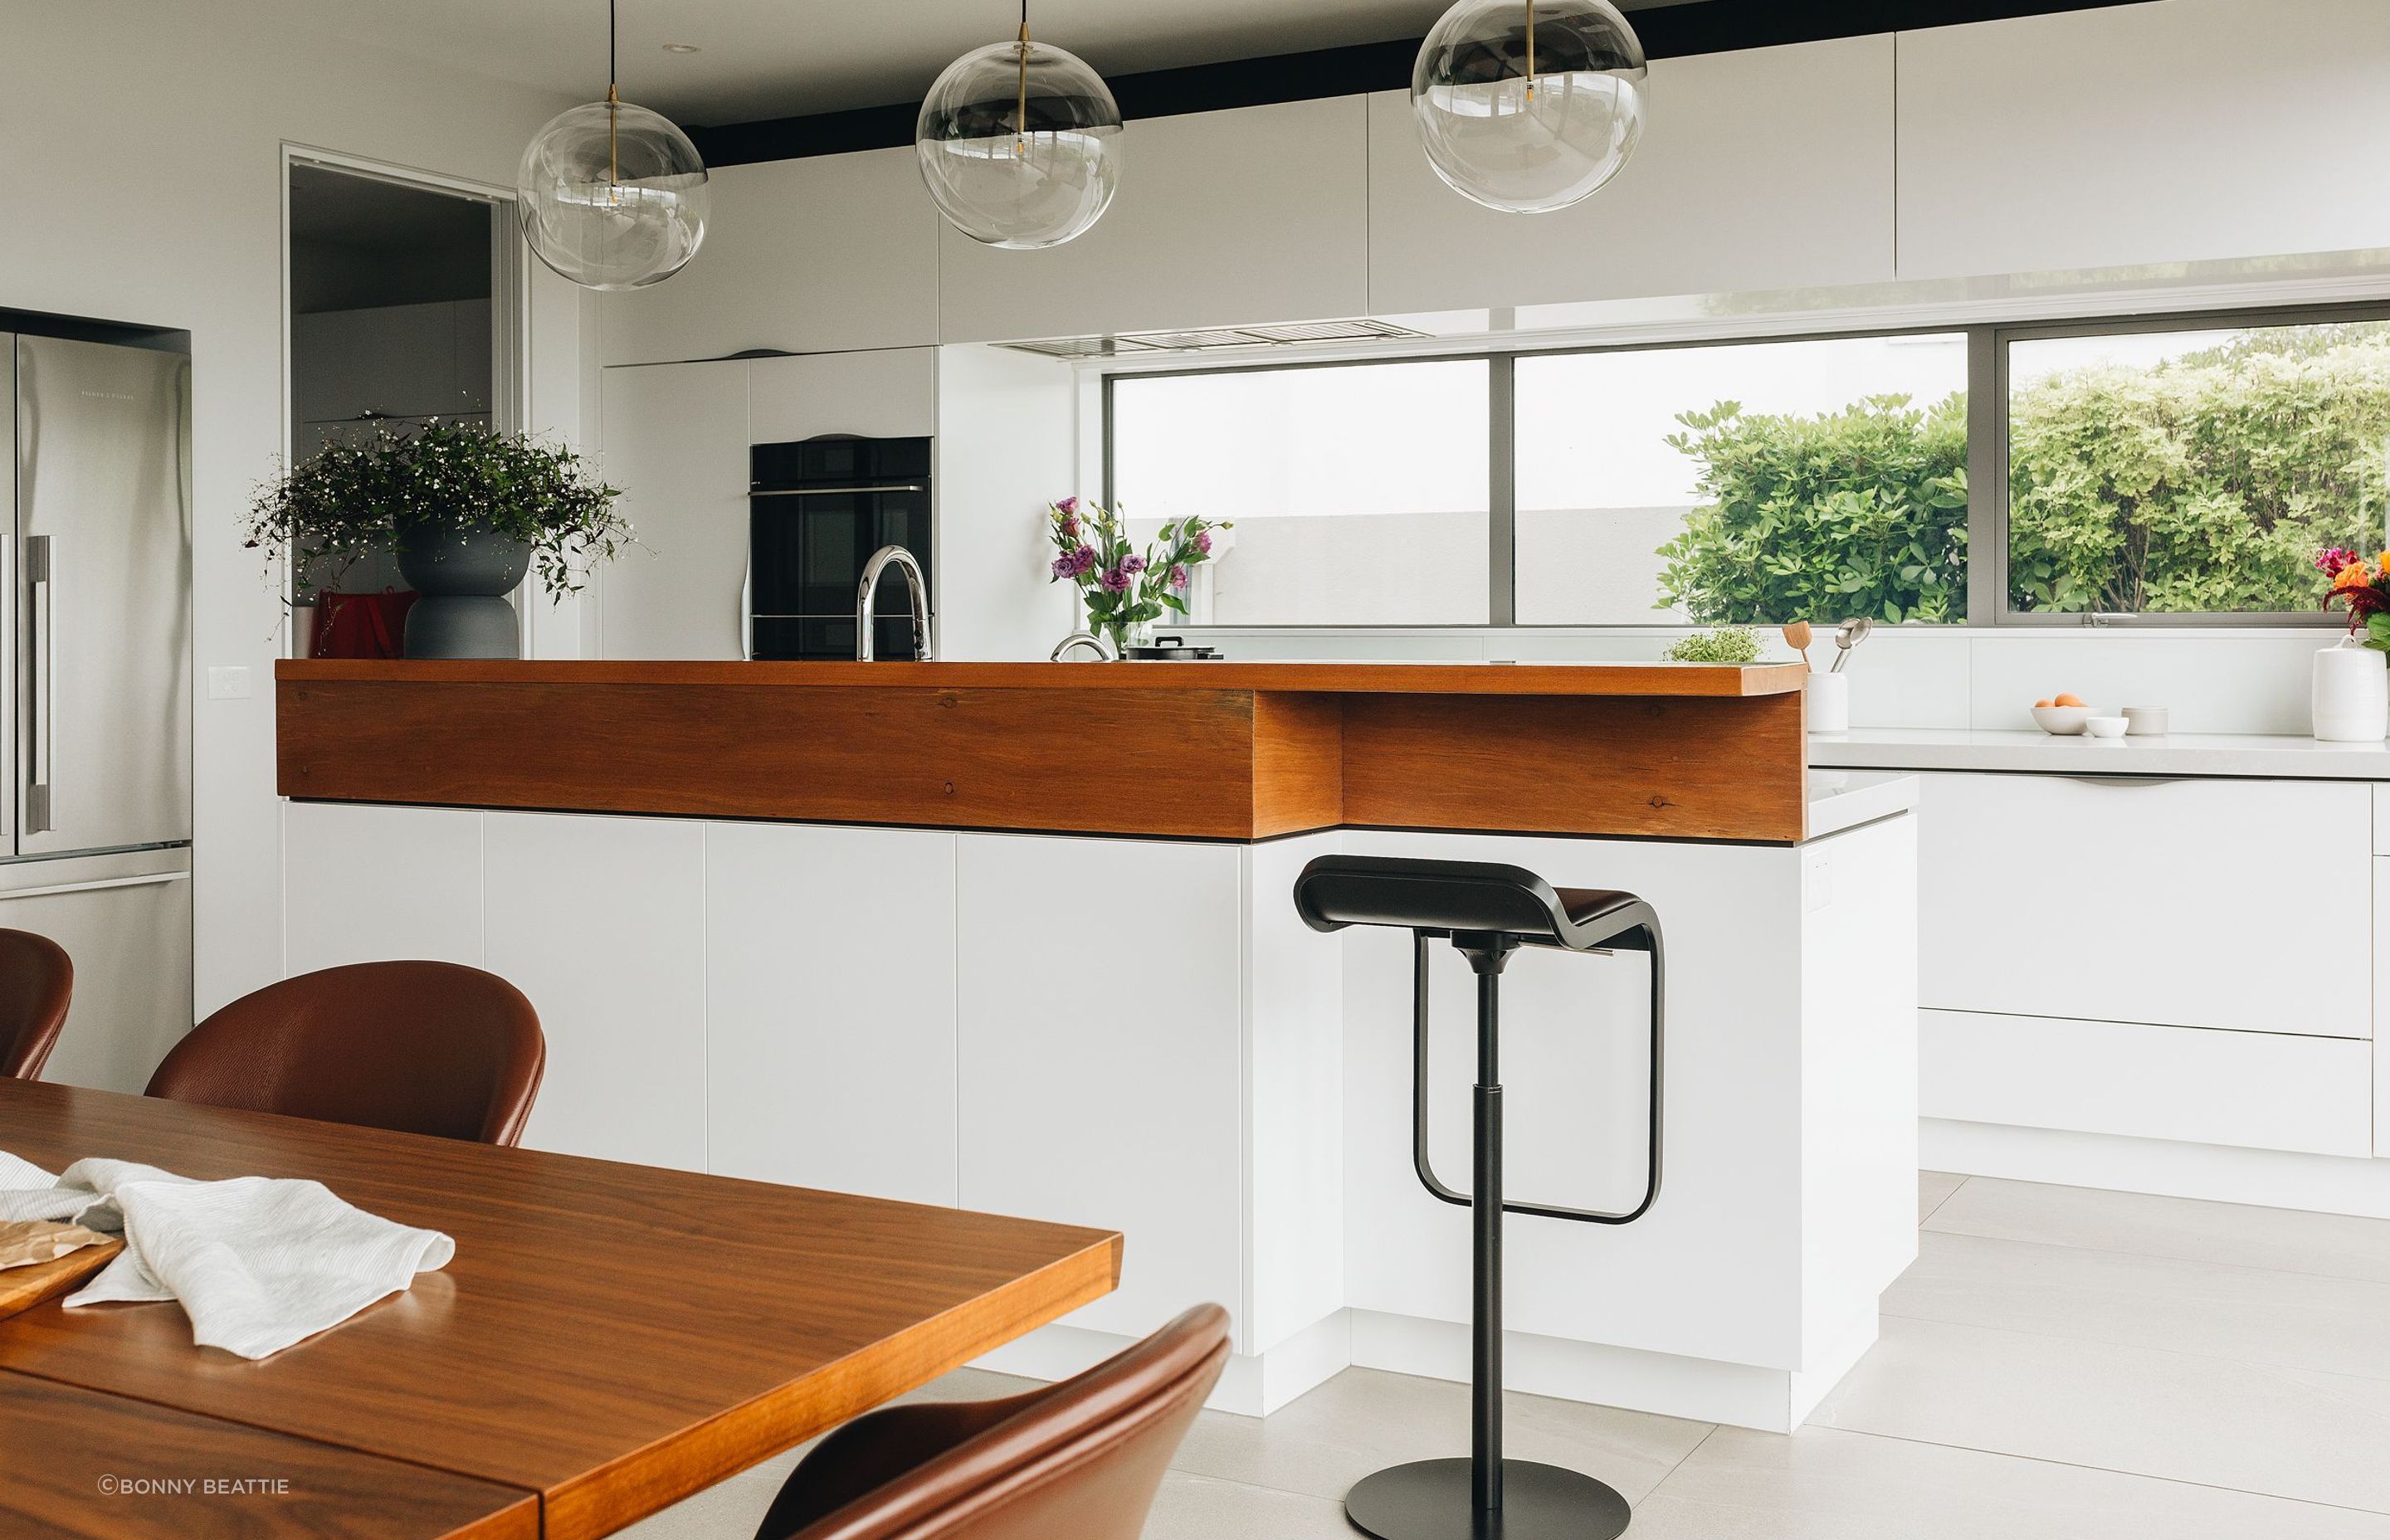 Design Solutions For Kitchens